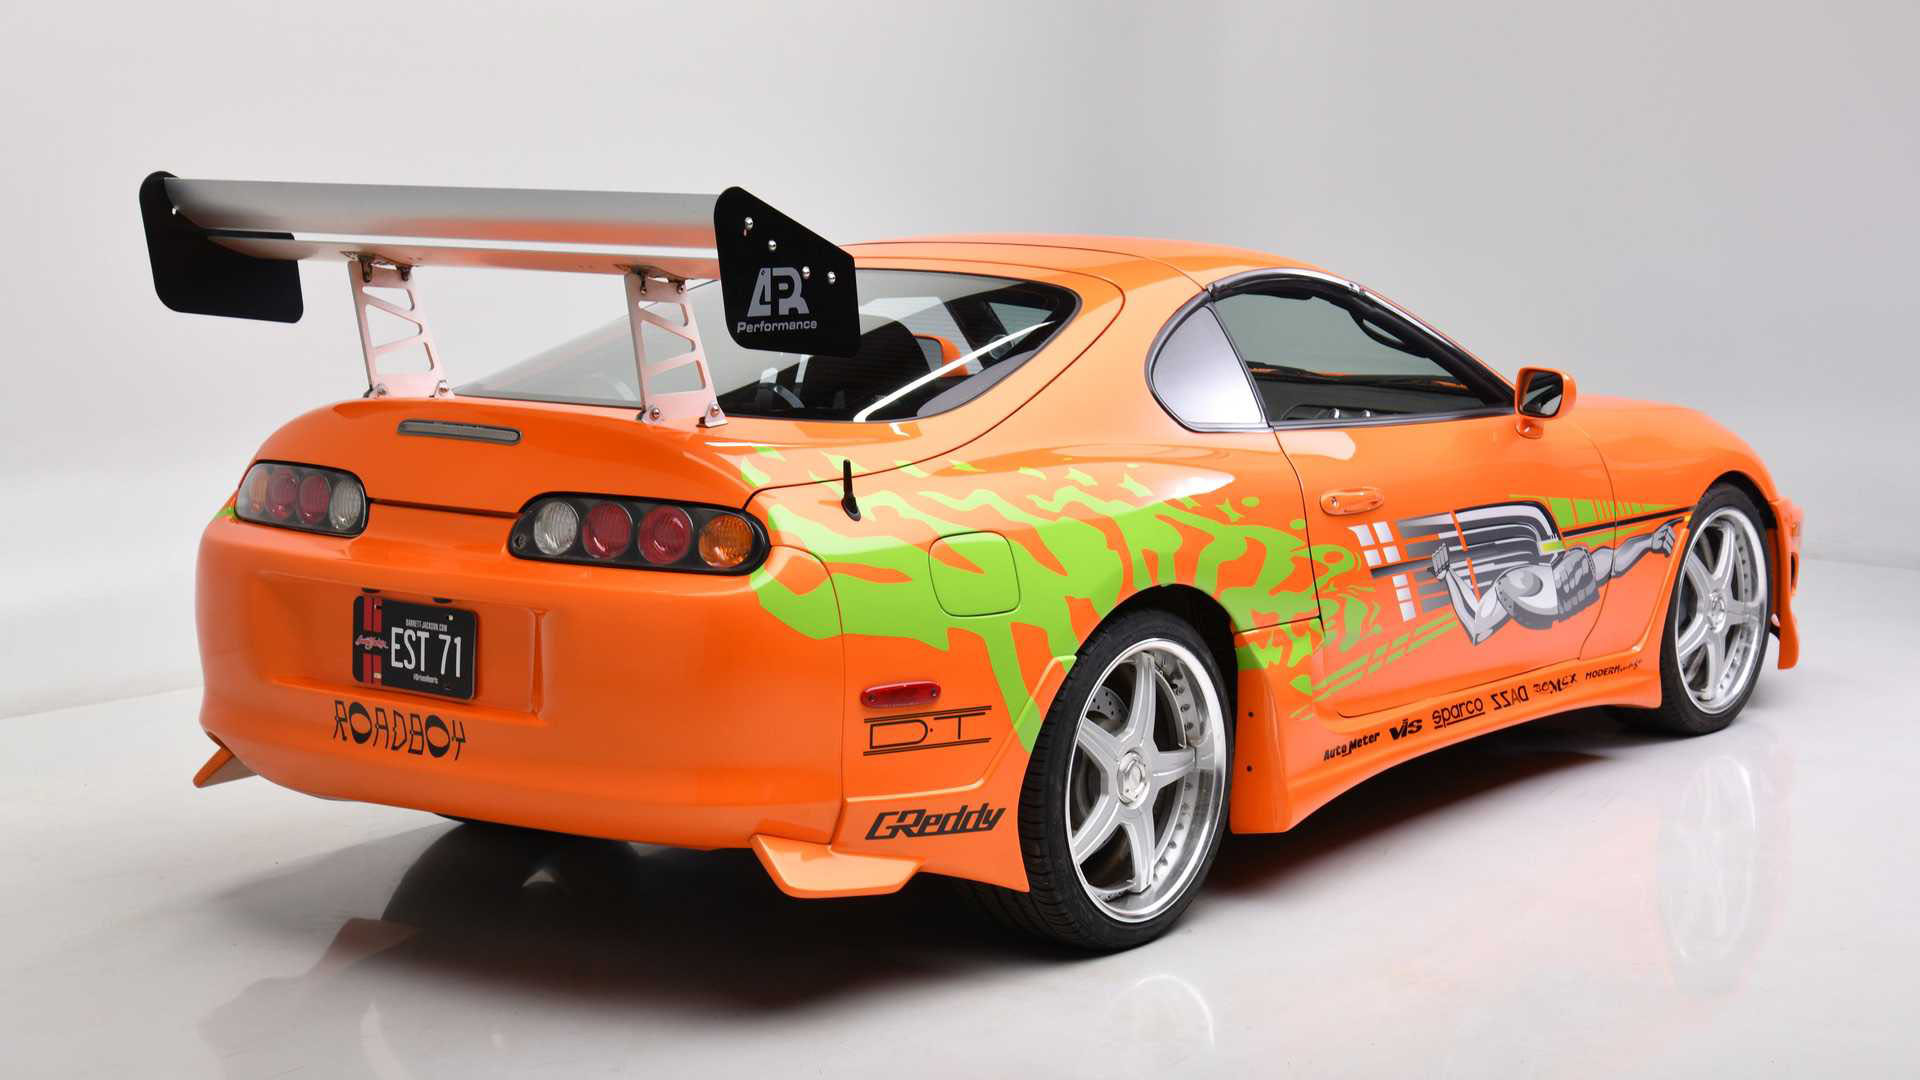 The Fast and the Furious Toyota Supra